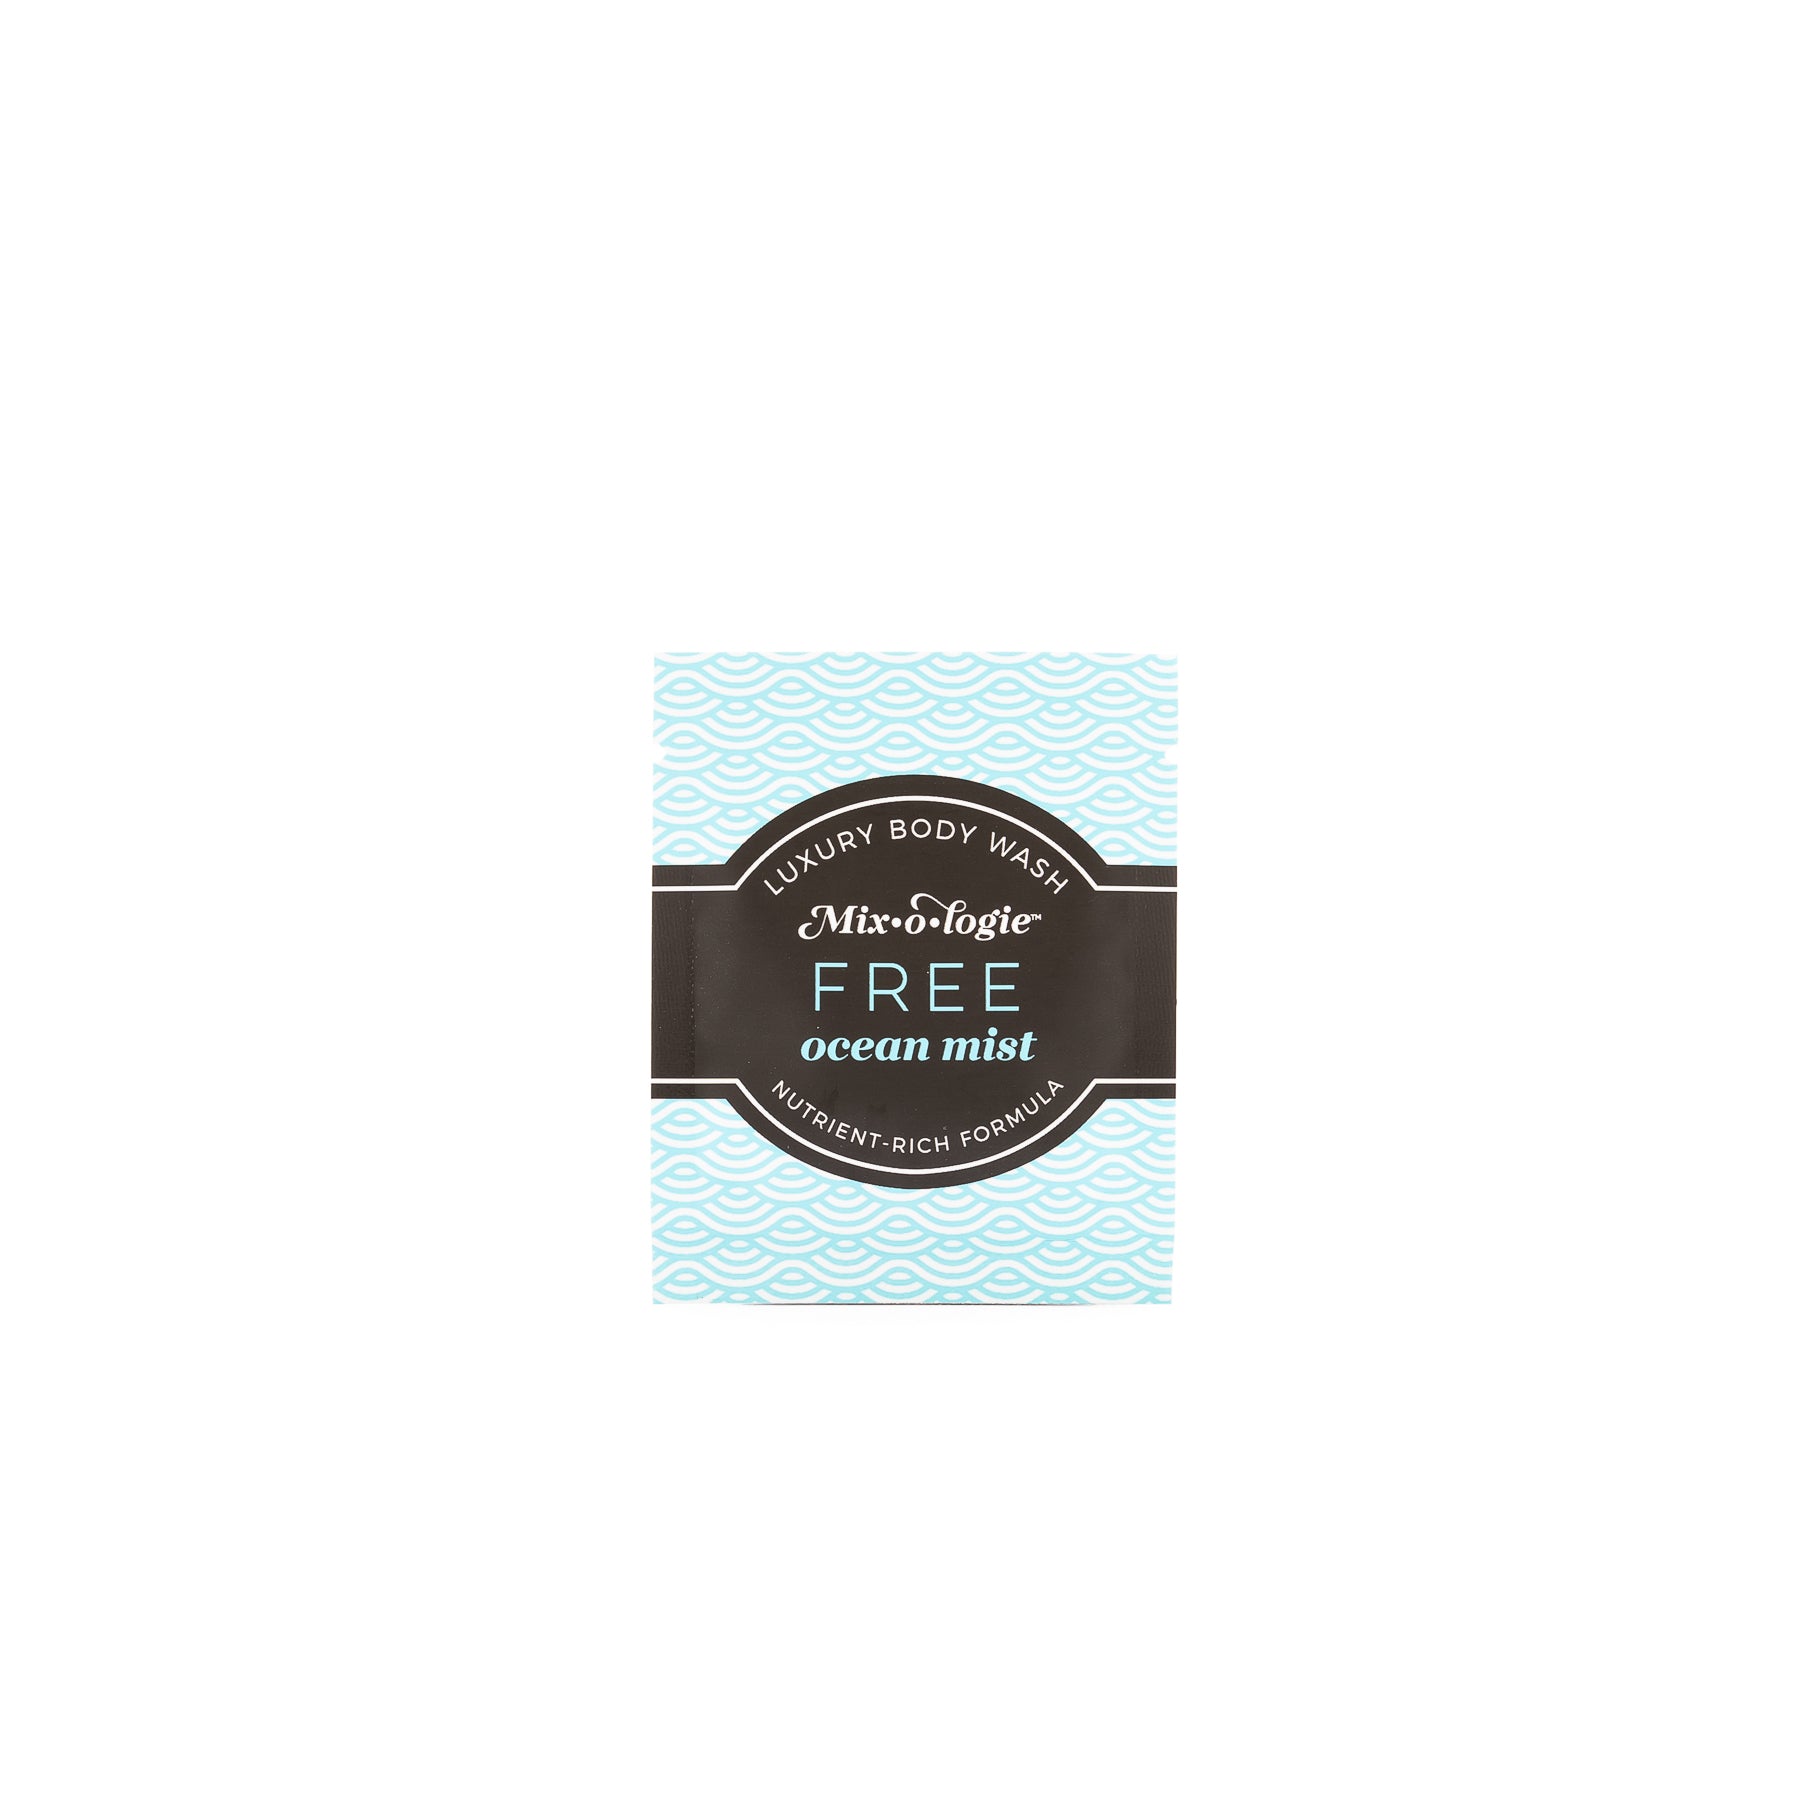 Luxury Body Wash Sample of Free (Ocean Mist) in light blue pattern with black label on white background.